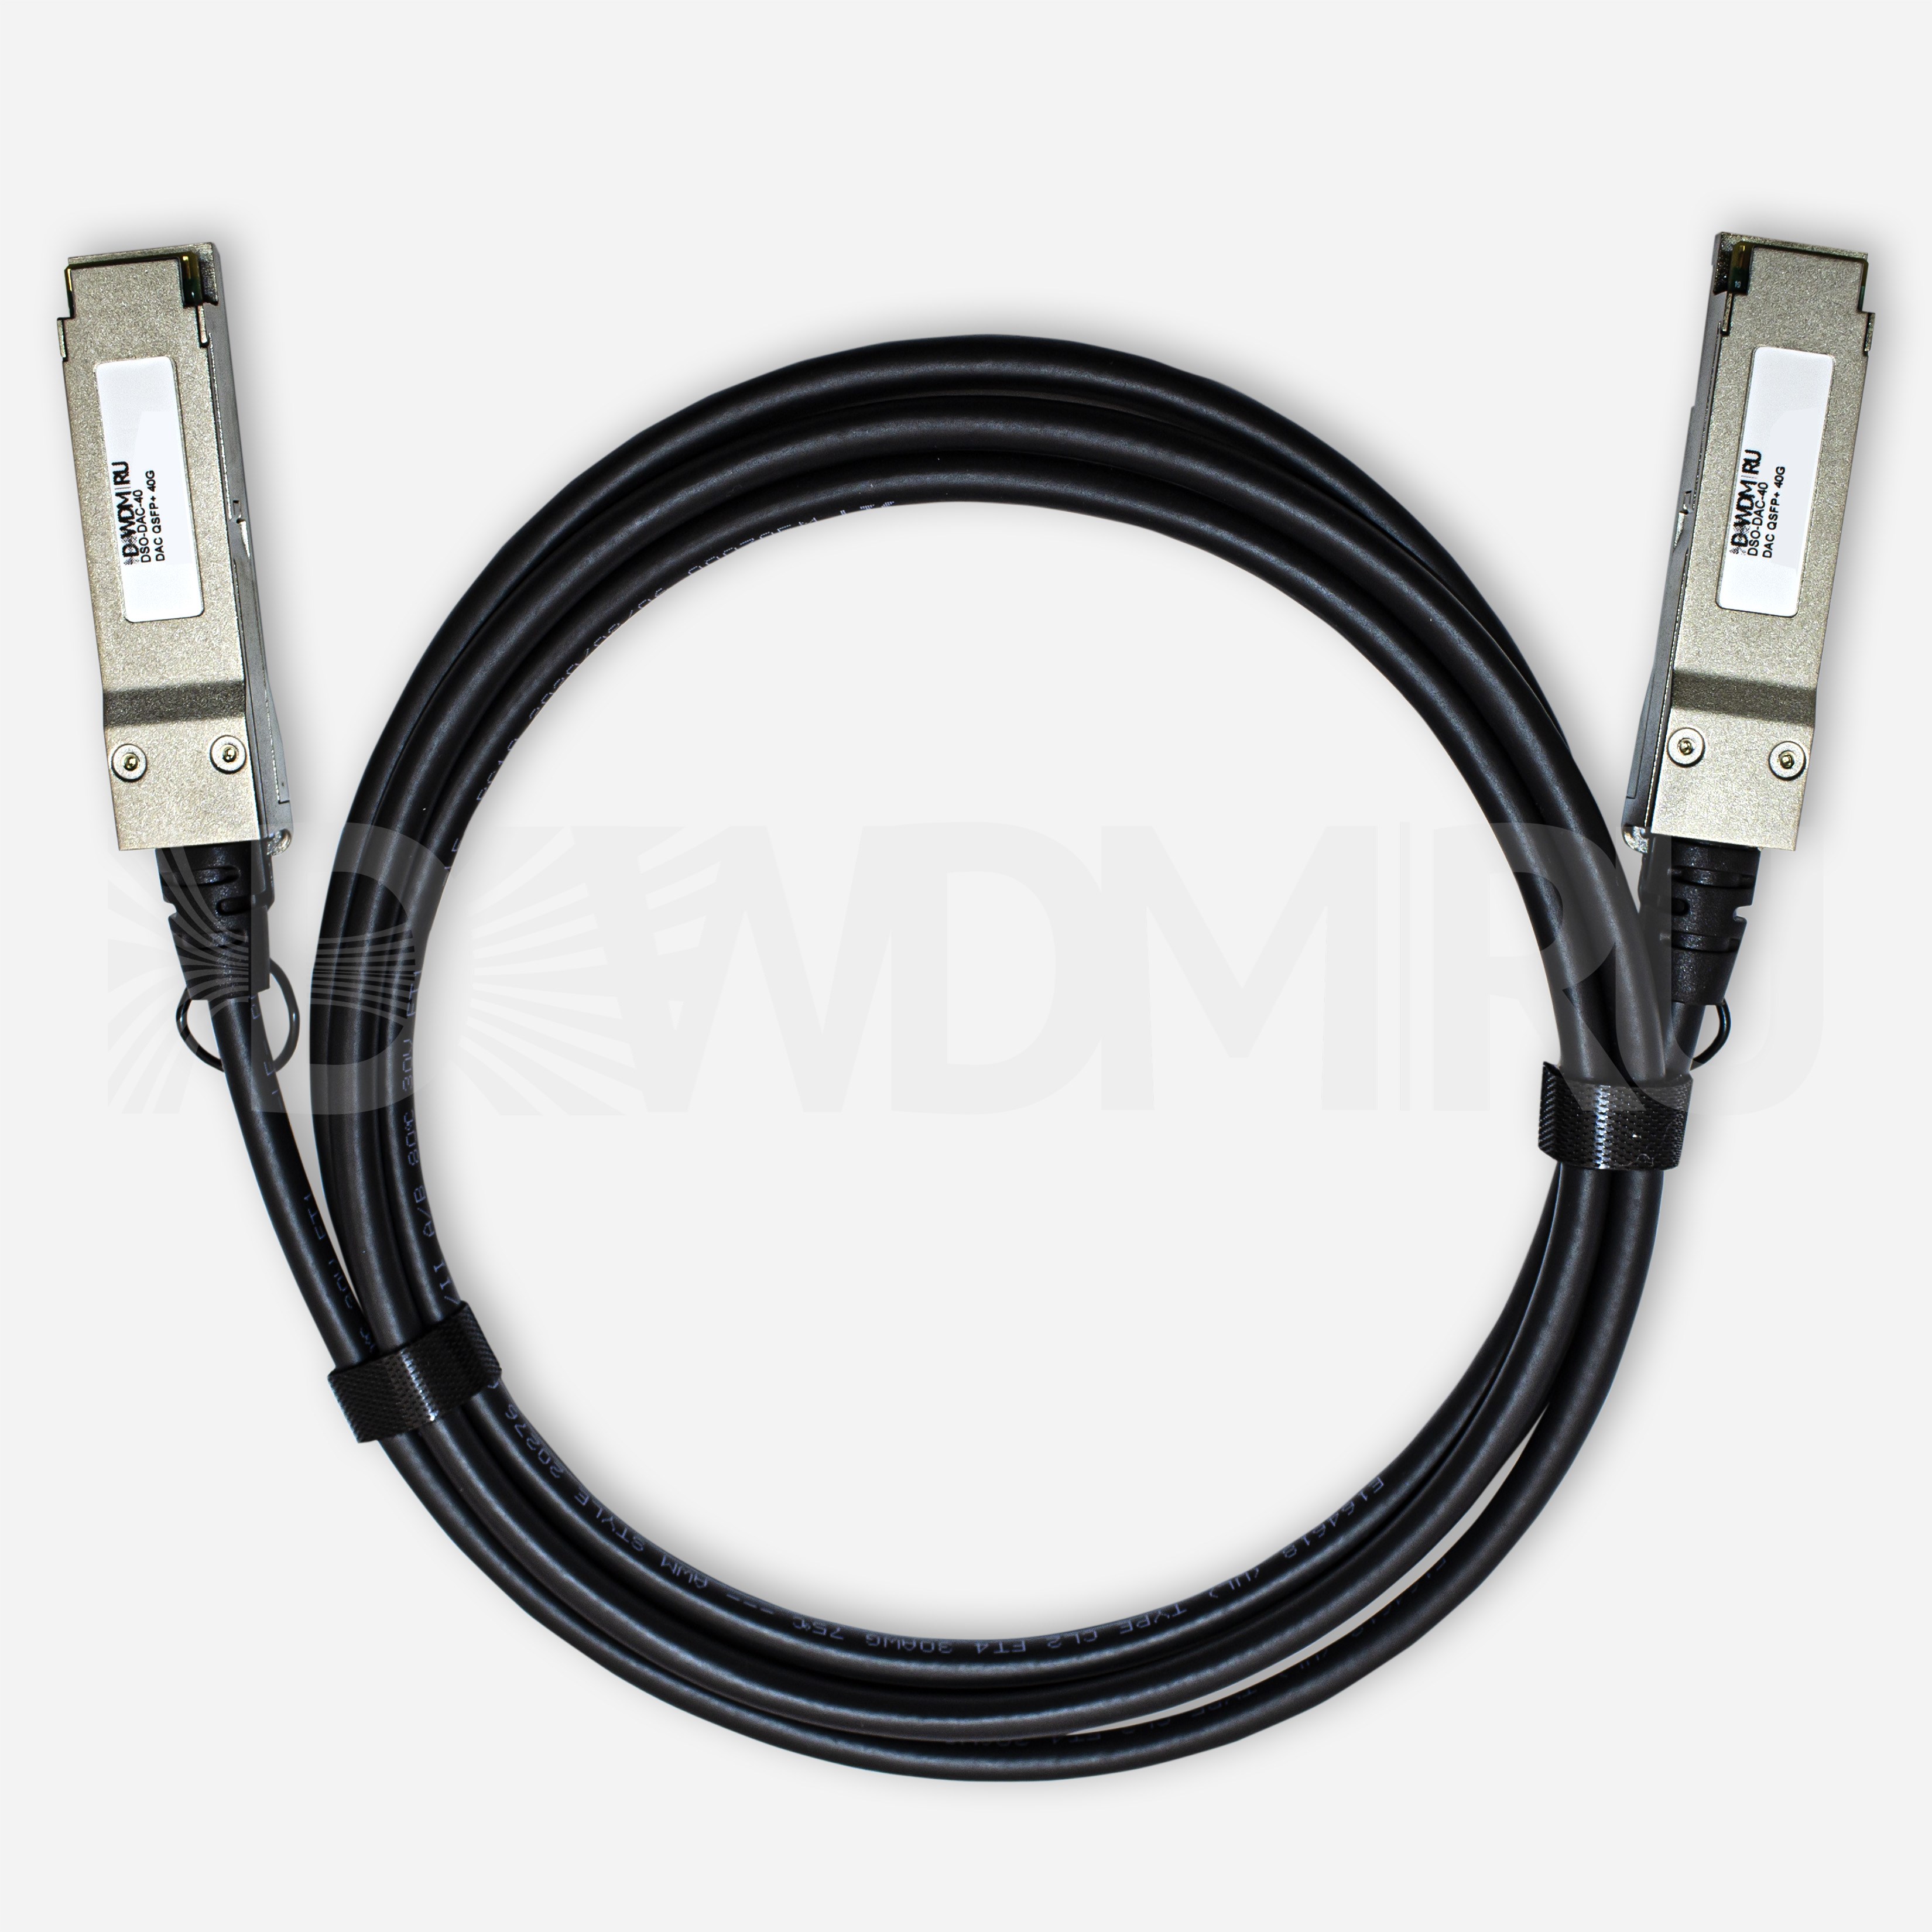 Кабель Direct Attached, QSFP+, 30AWG, 40 Гб/с, 2 м - ДВДМ.РУ (DSO-DAC-40-2)